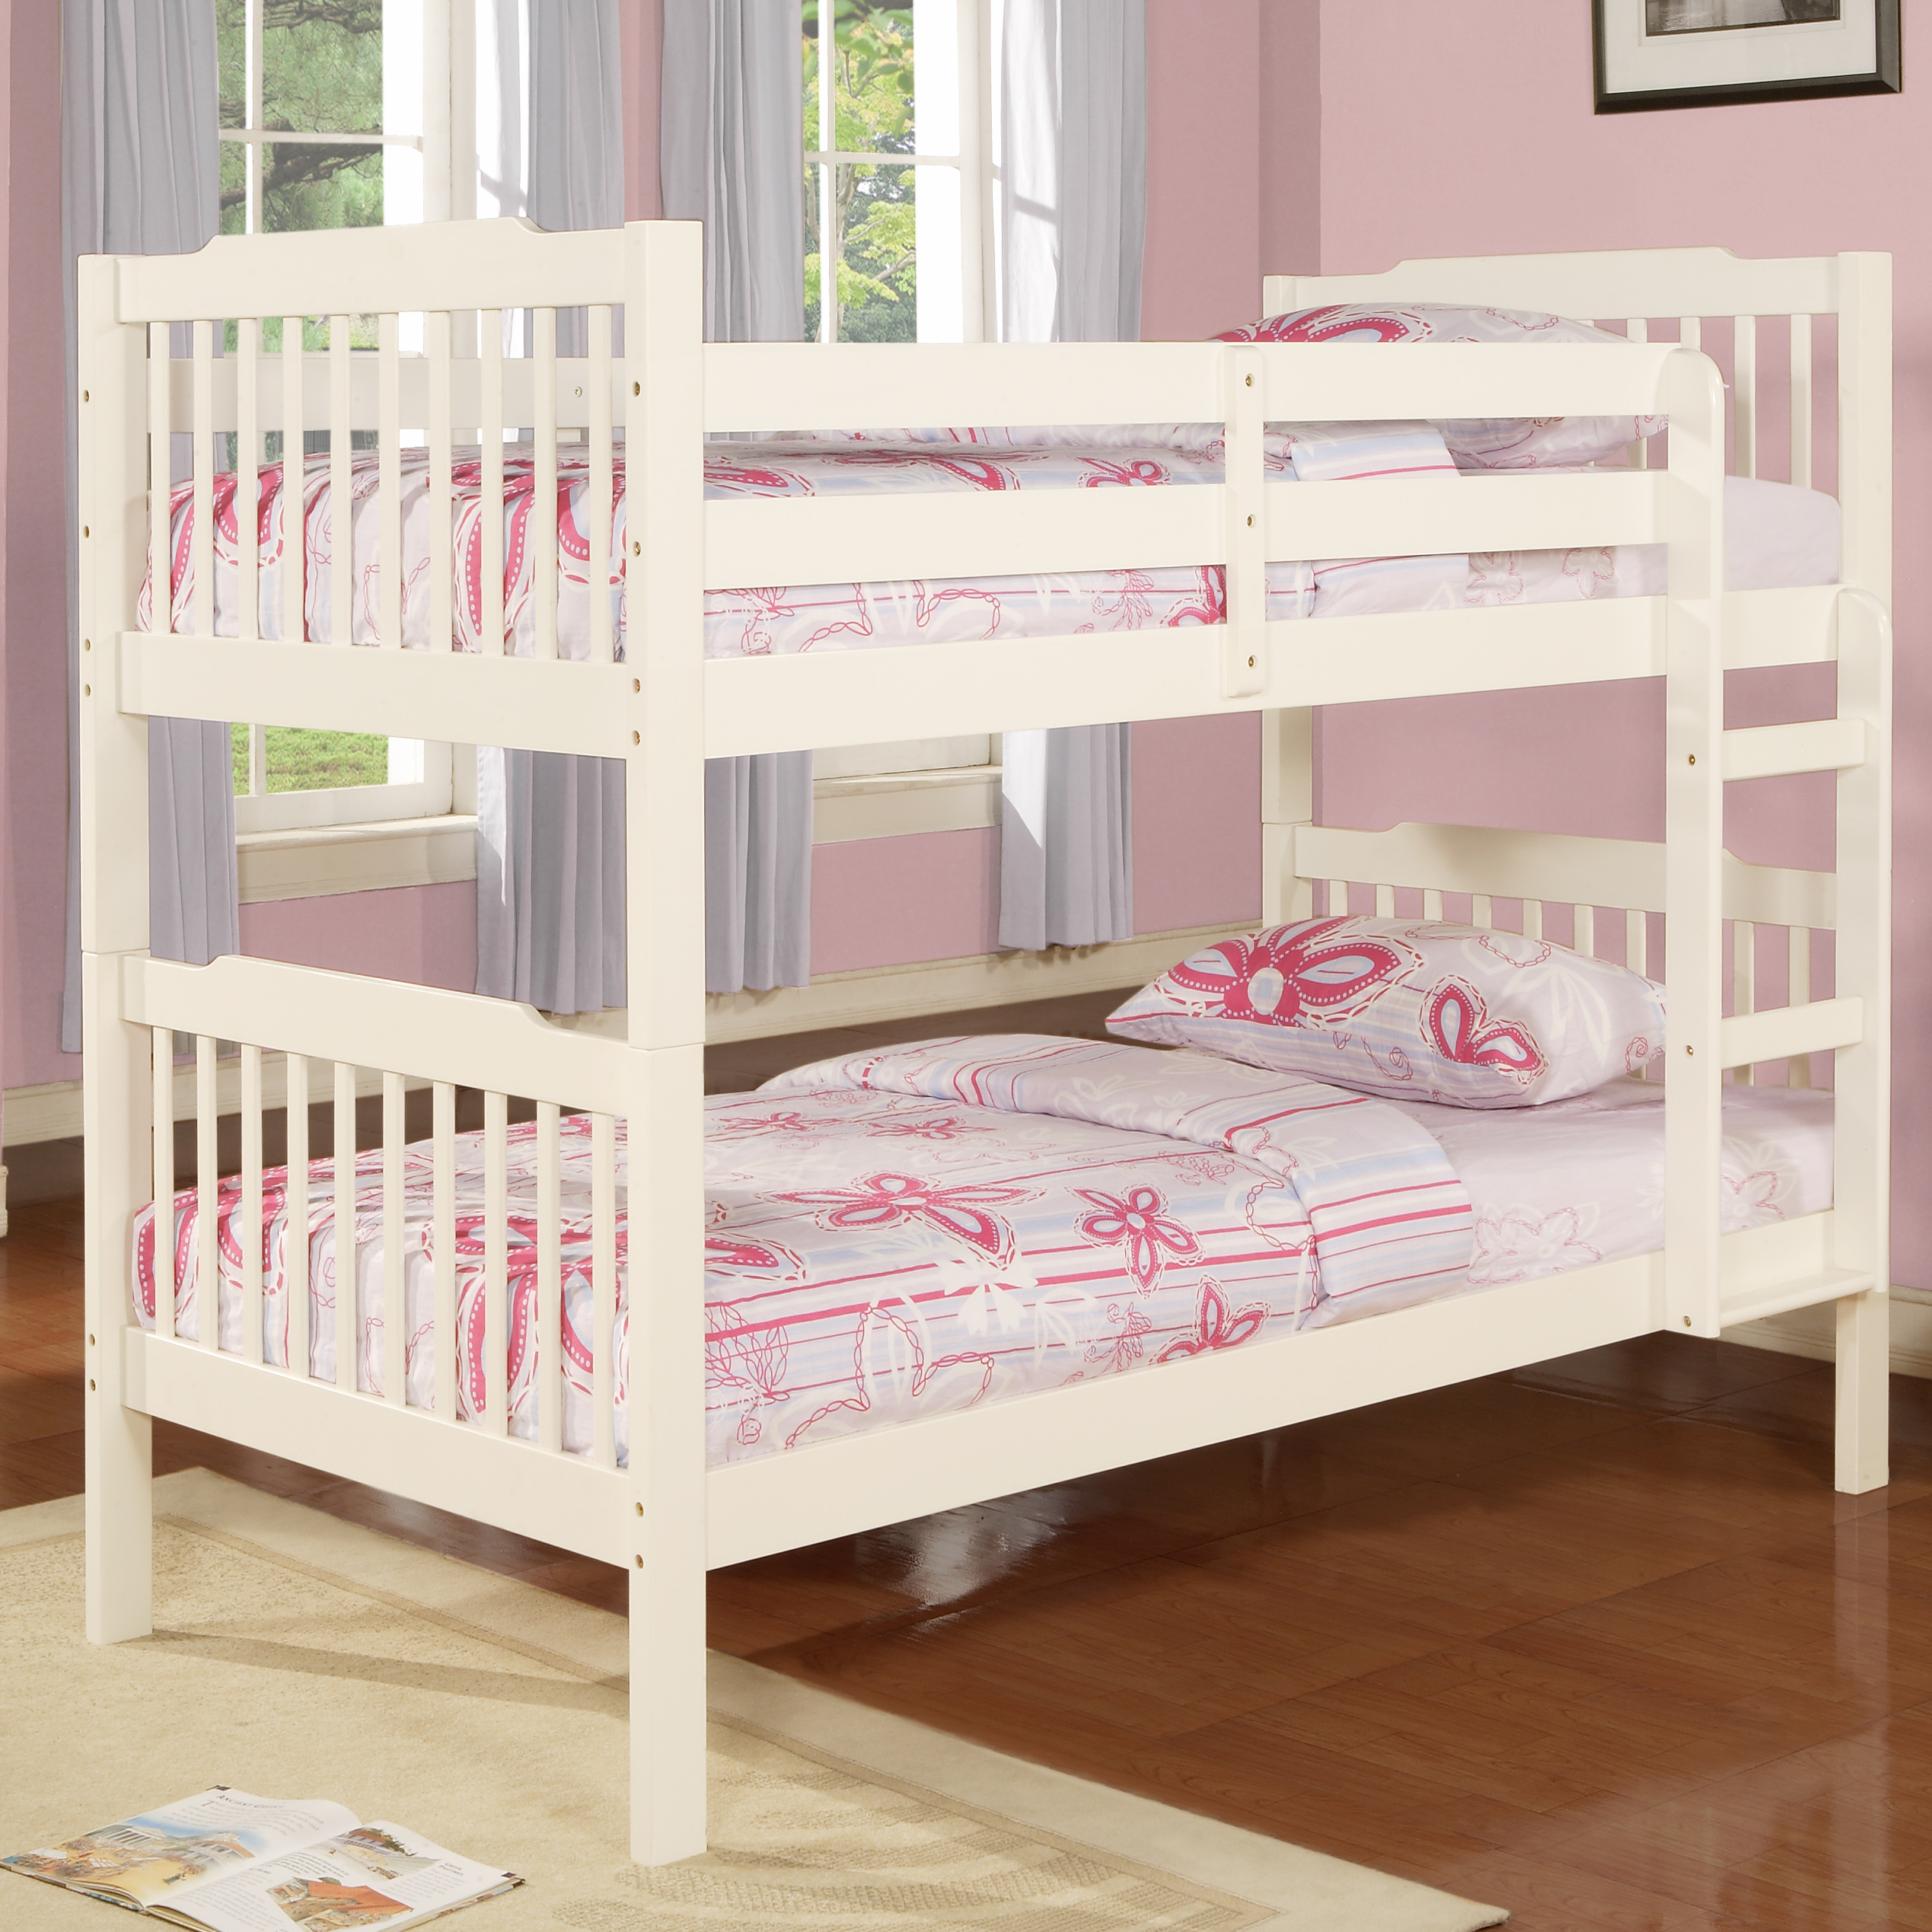 Chelsea Lane Elise Convertible Twin Over Twin Wood Bunk Bed, White - image 1 of 5